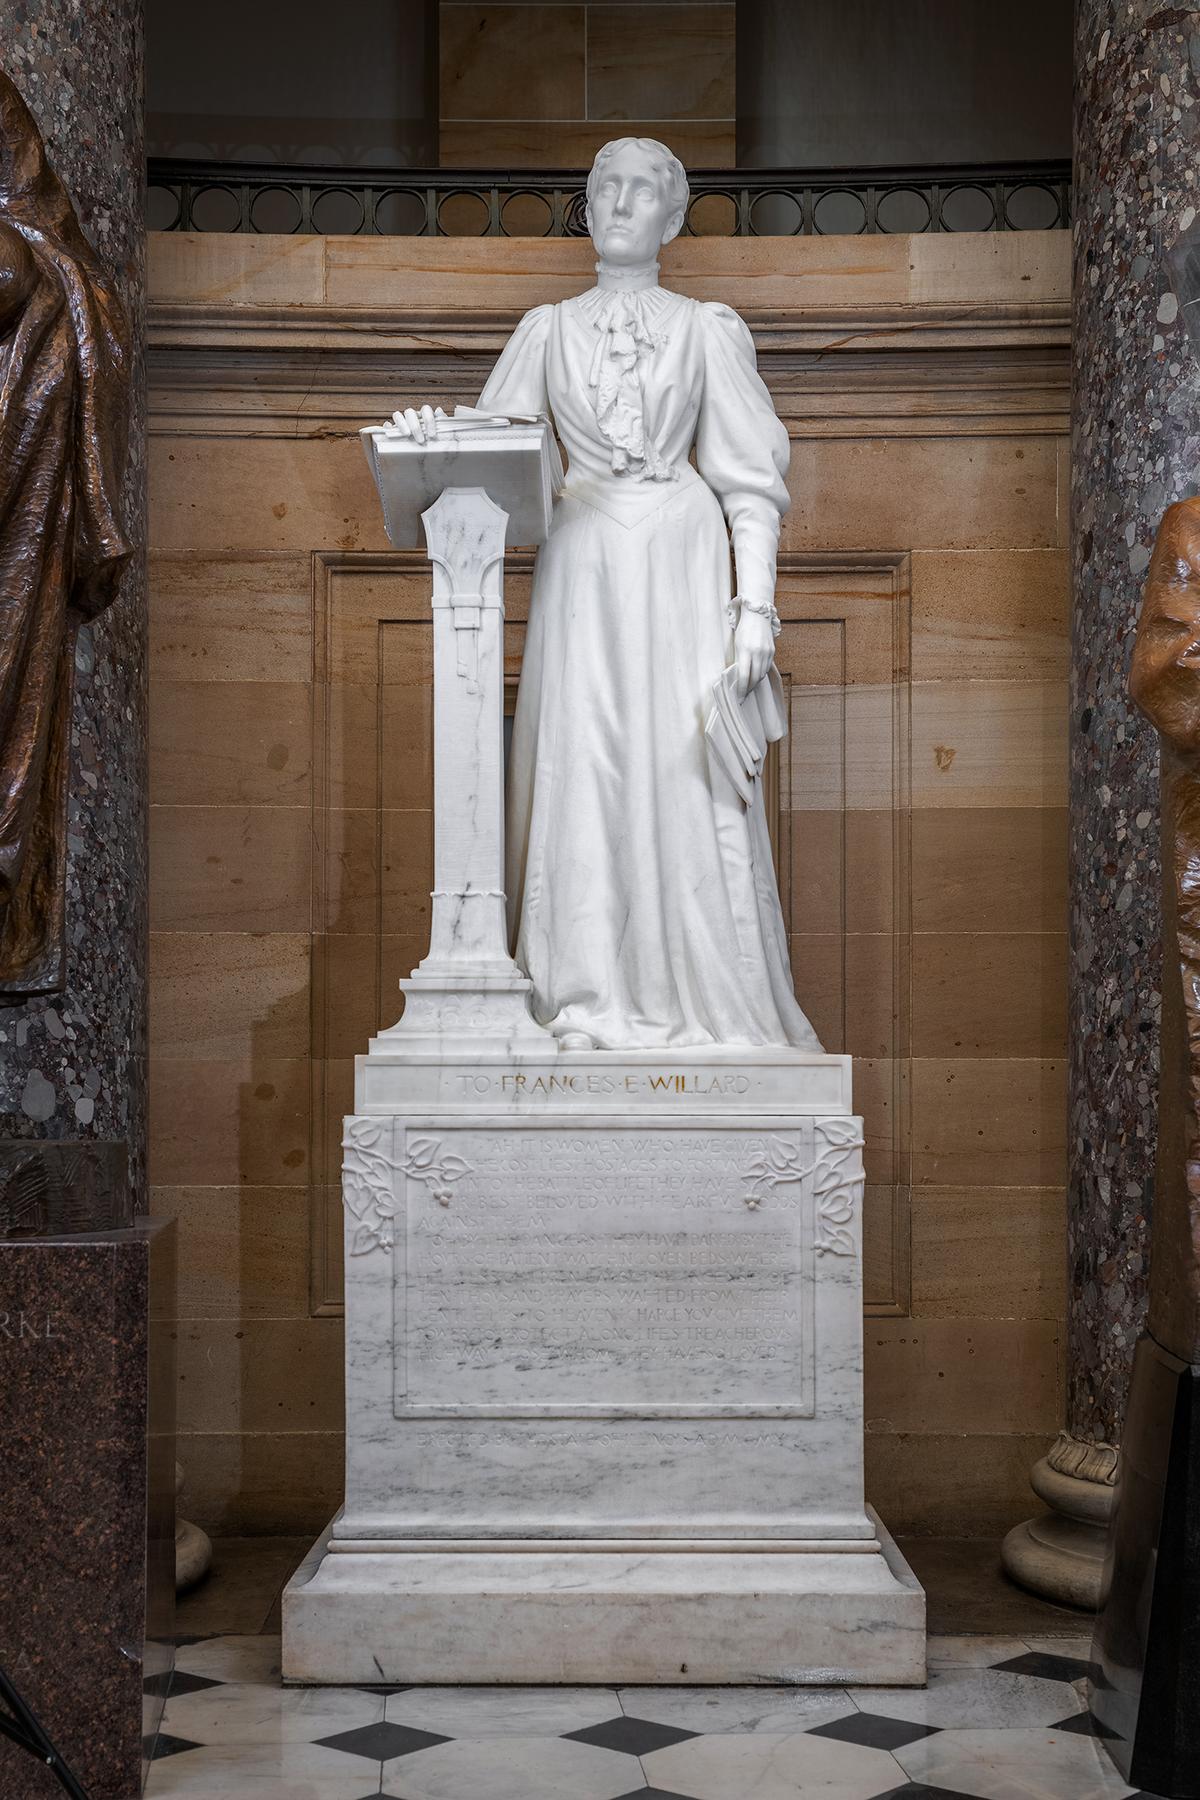 Statue of Frances E. Willard (1839-1898), given 1905, by Helen Farnsworth Mears. National Statuary Hall, U.S. Capitol, Washington. Architect of the Capitol. (Public Domain)